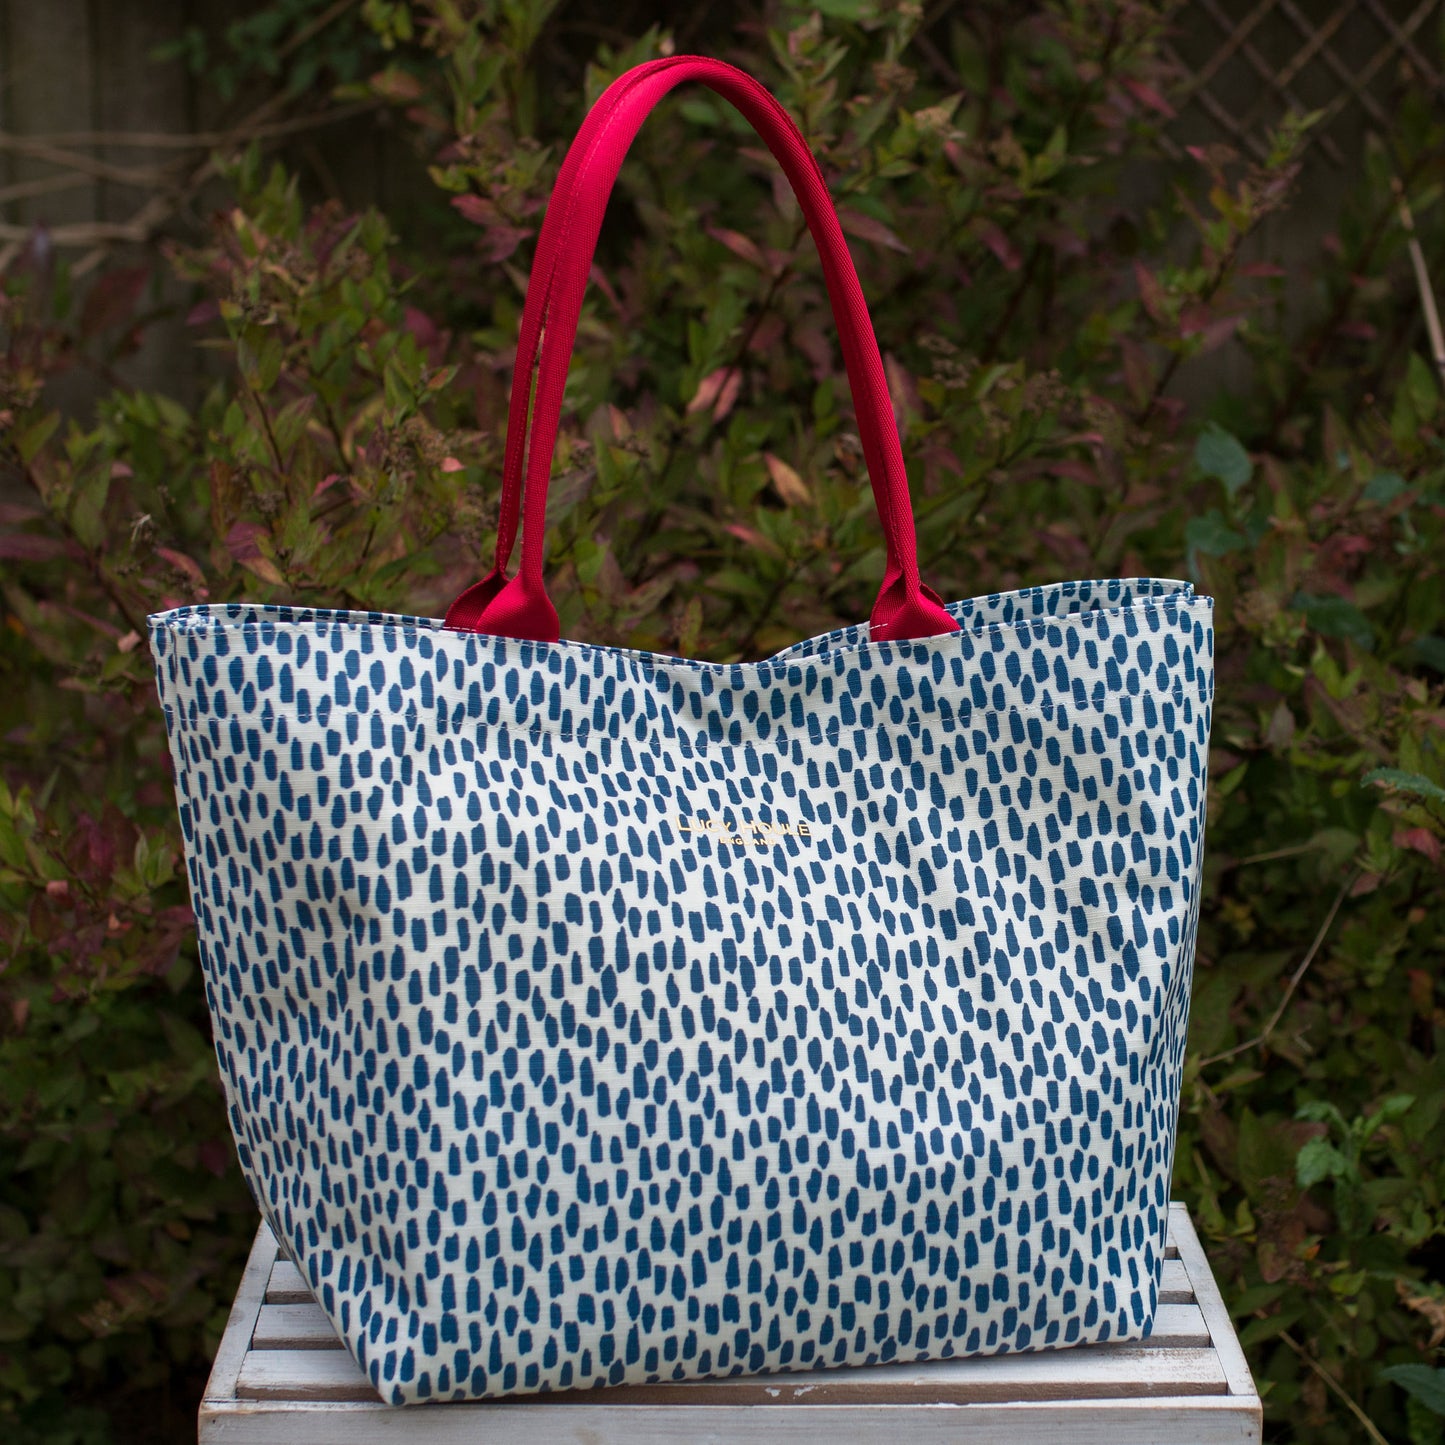 Navy Cobblestone Medium Tote Bag with Red Handles